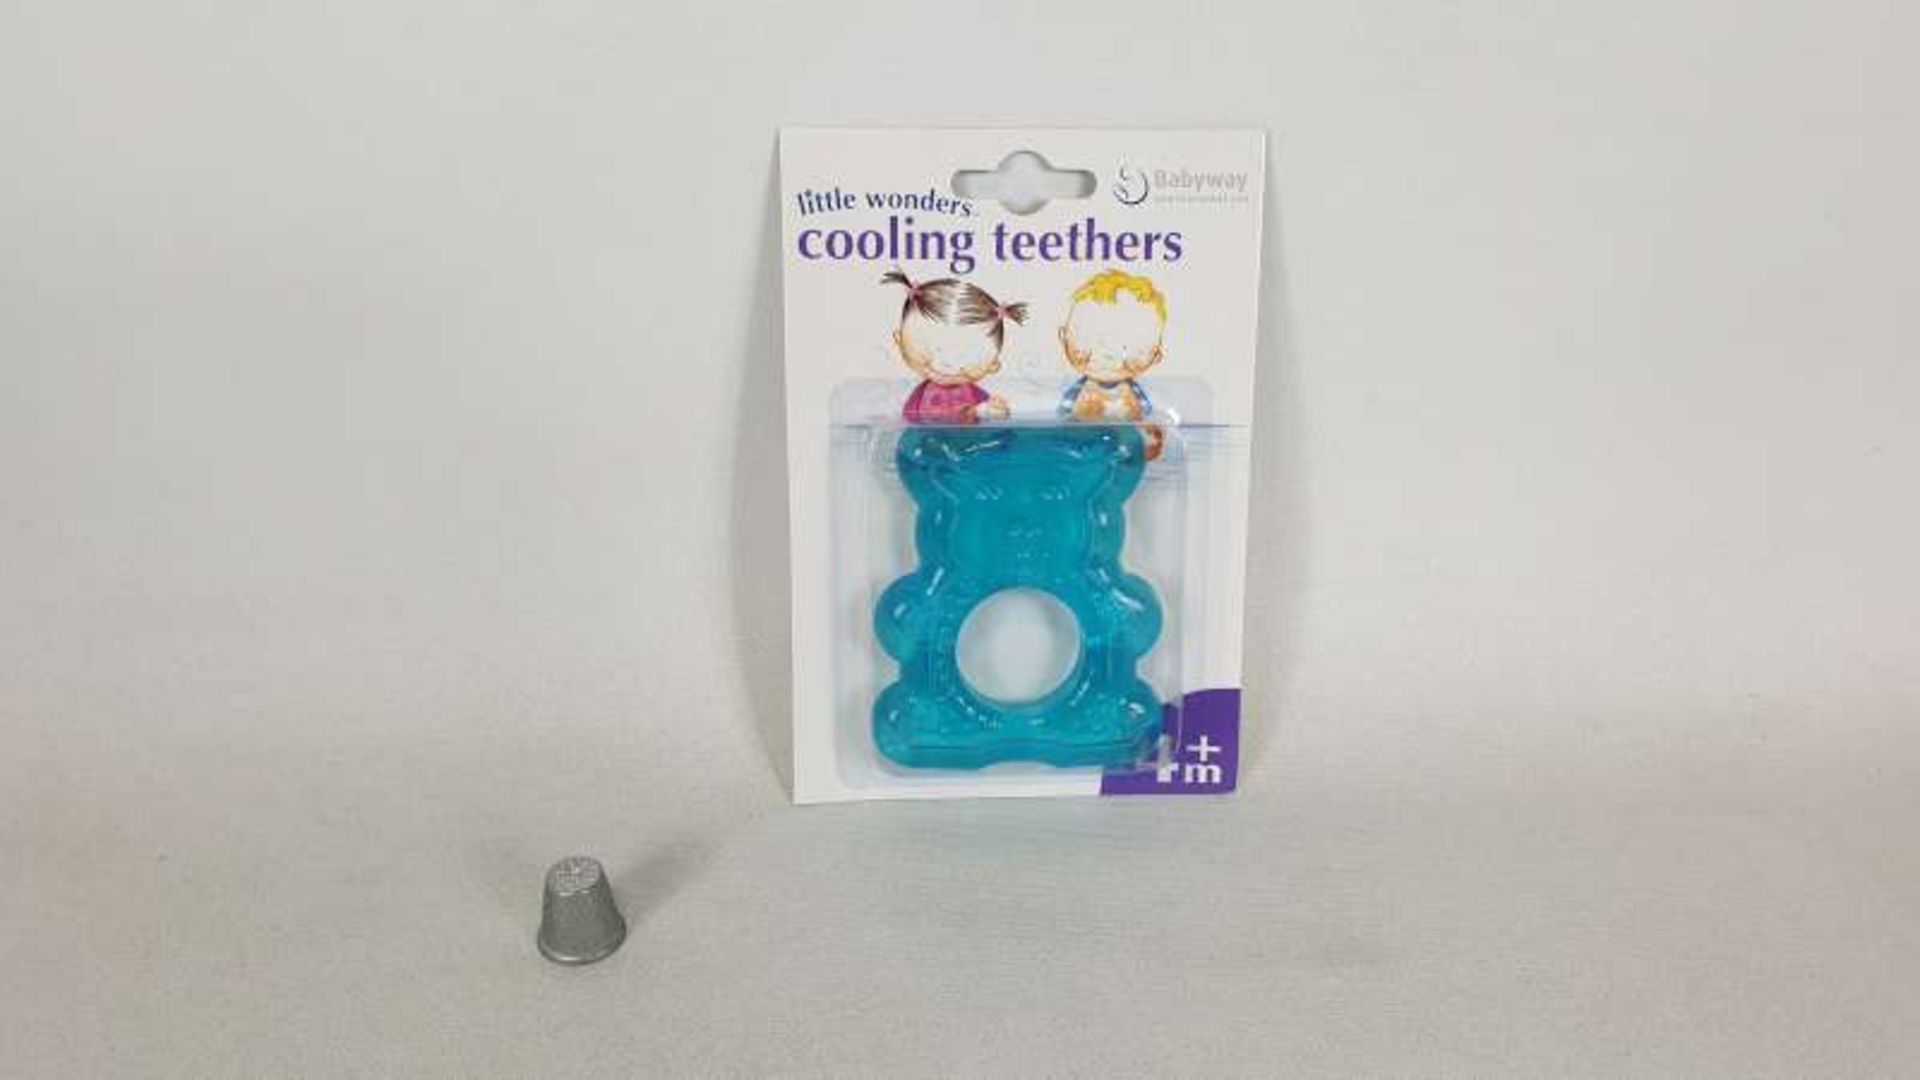 144 X LITTLE WONDERS COOLING TEETHERS IN 1 BOX